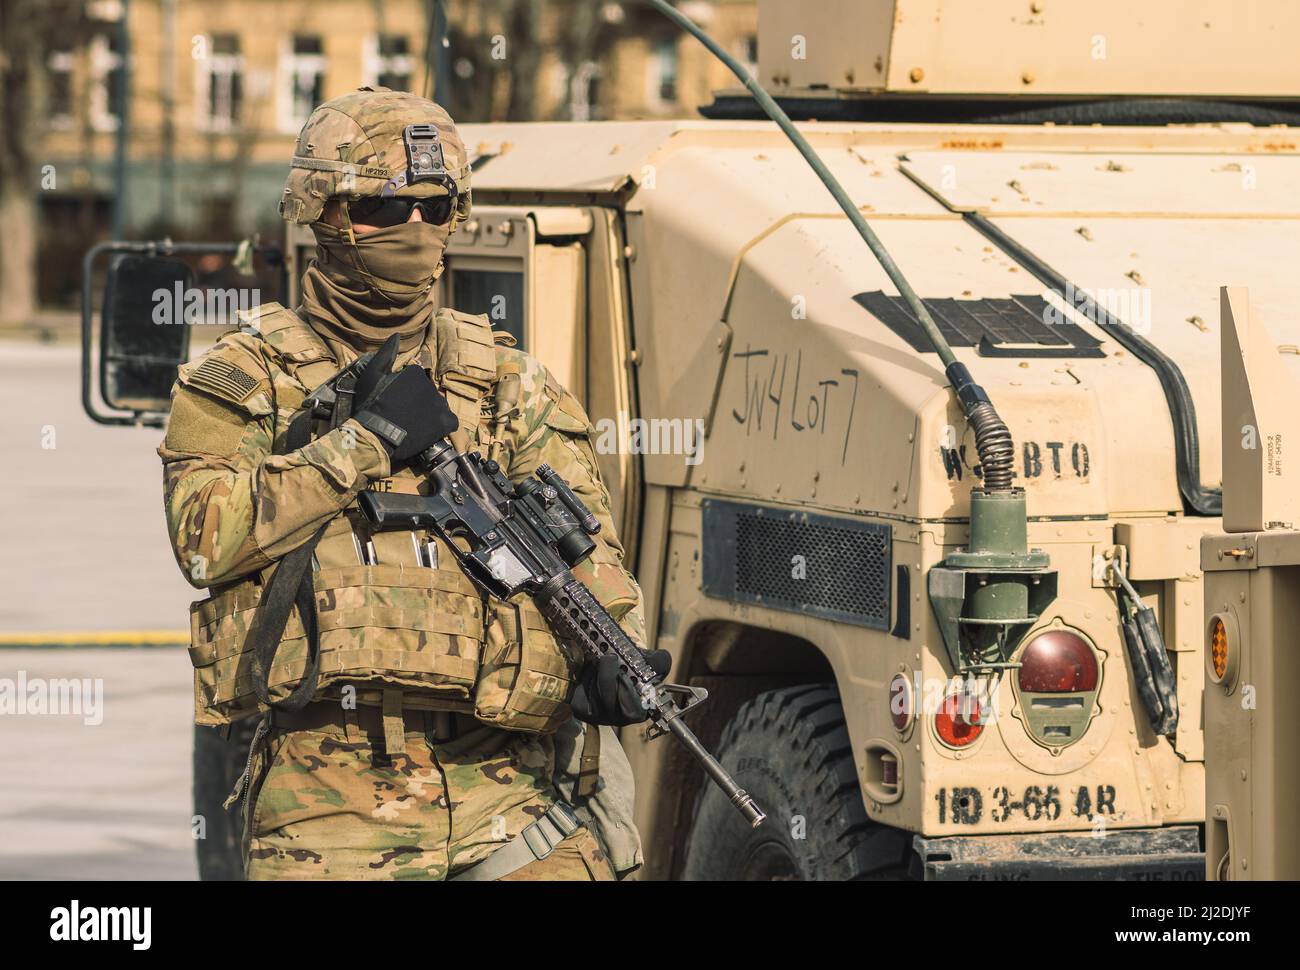 United States - March 29 2022: United States Marine Corps soldier with covered face and sunglasses, shotgun and armored vehicle humvee in the city, US Stock Photo